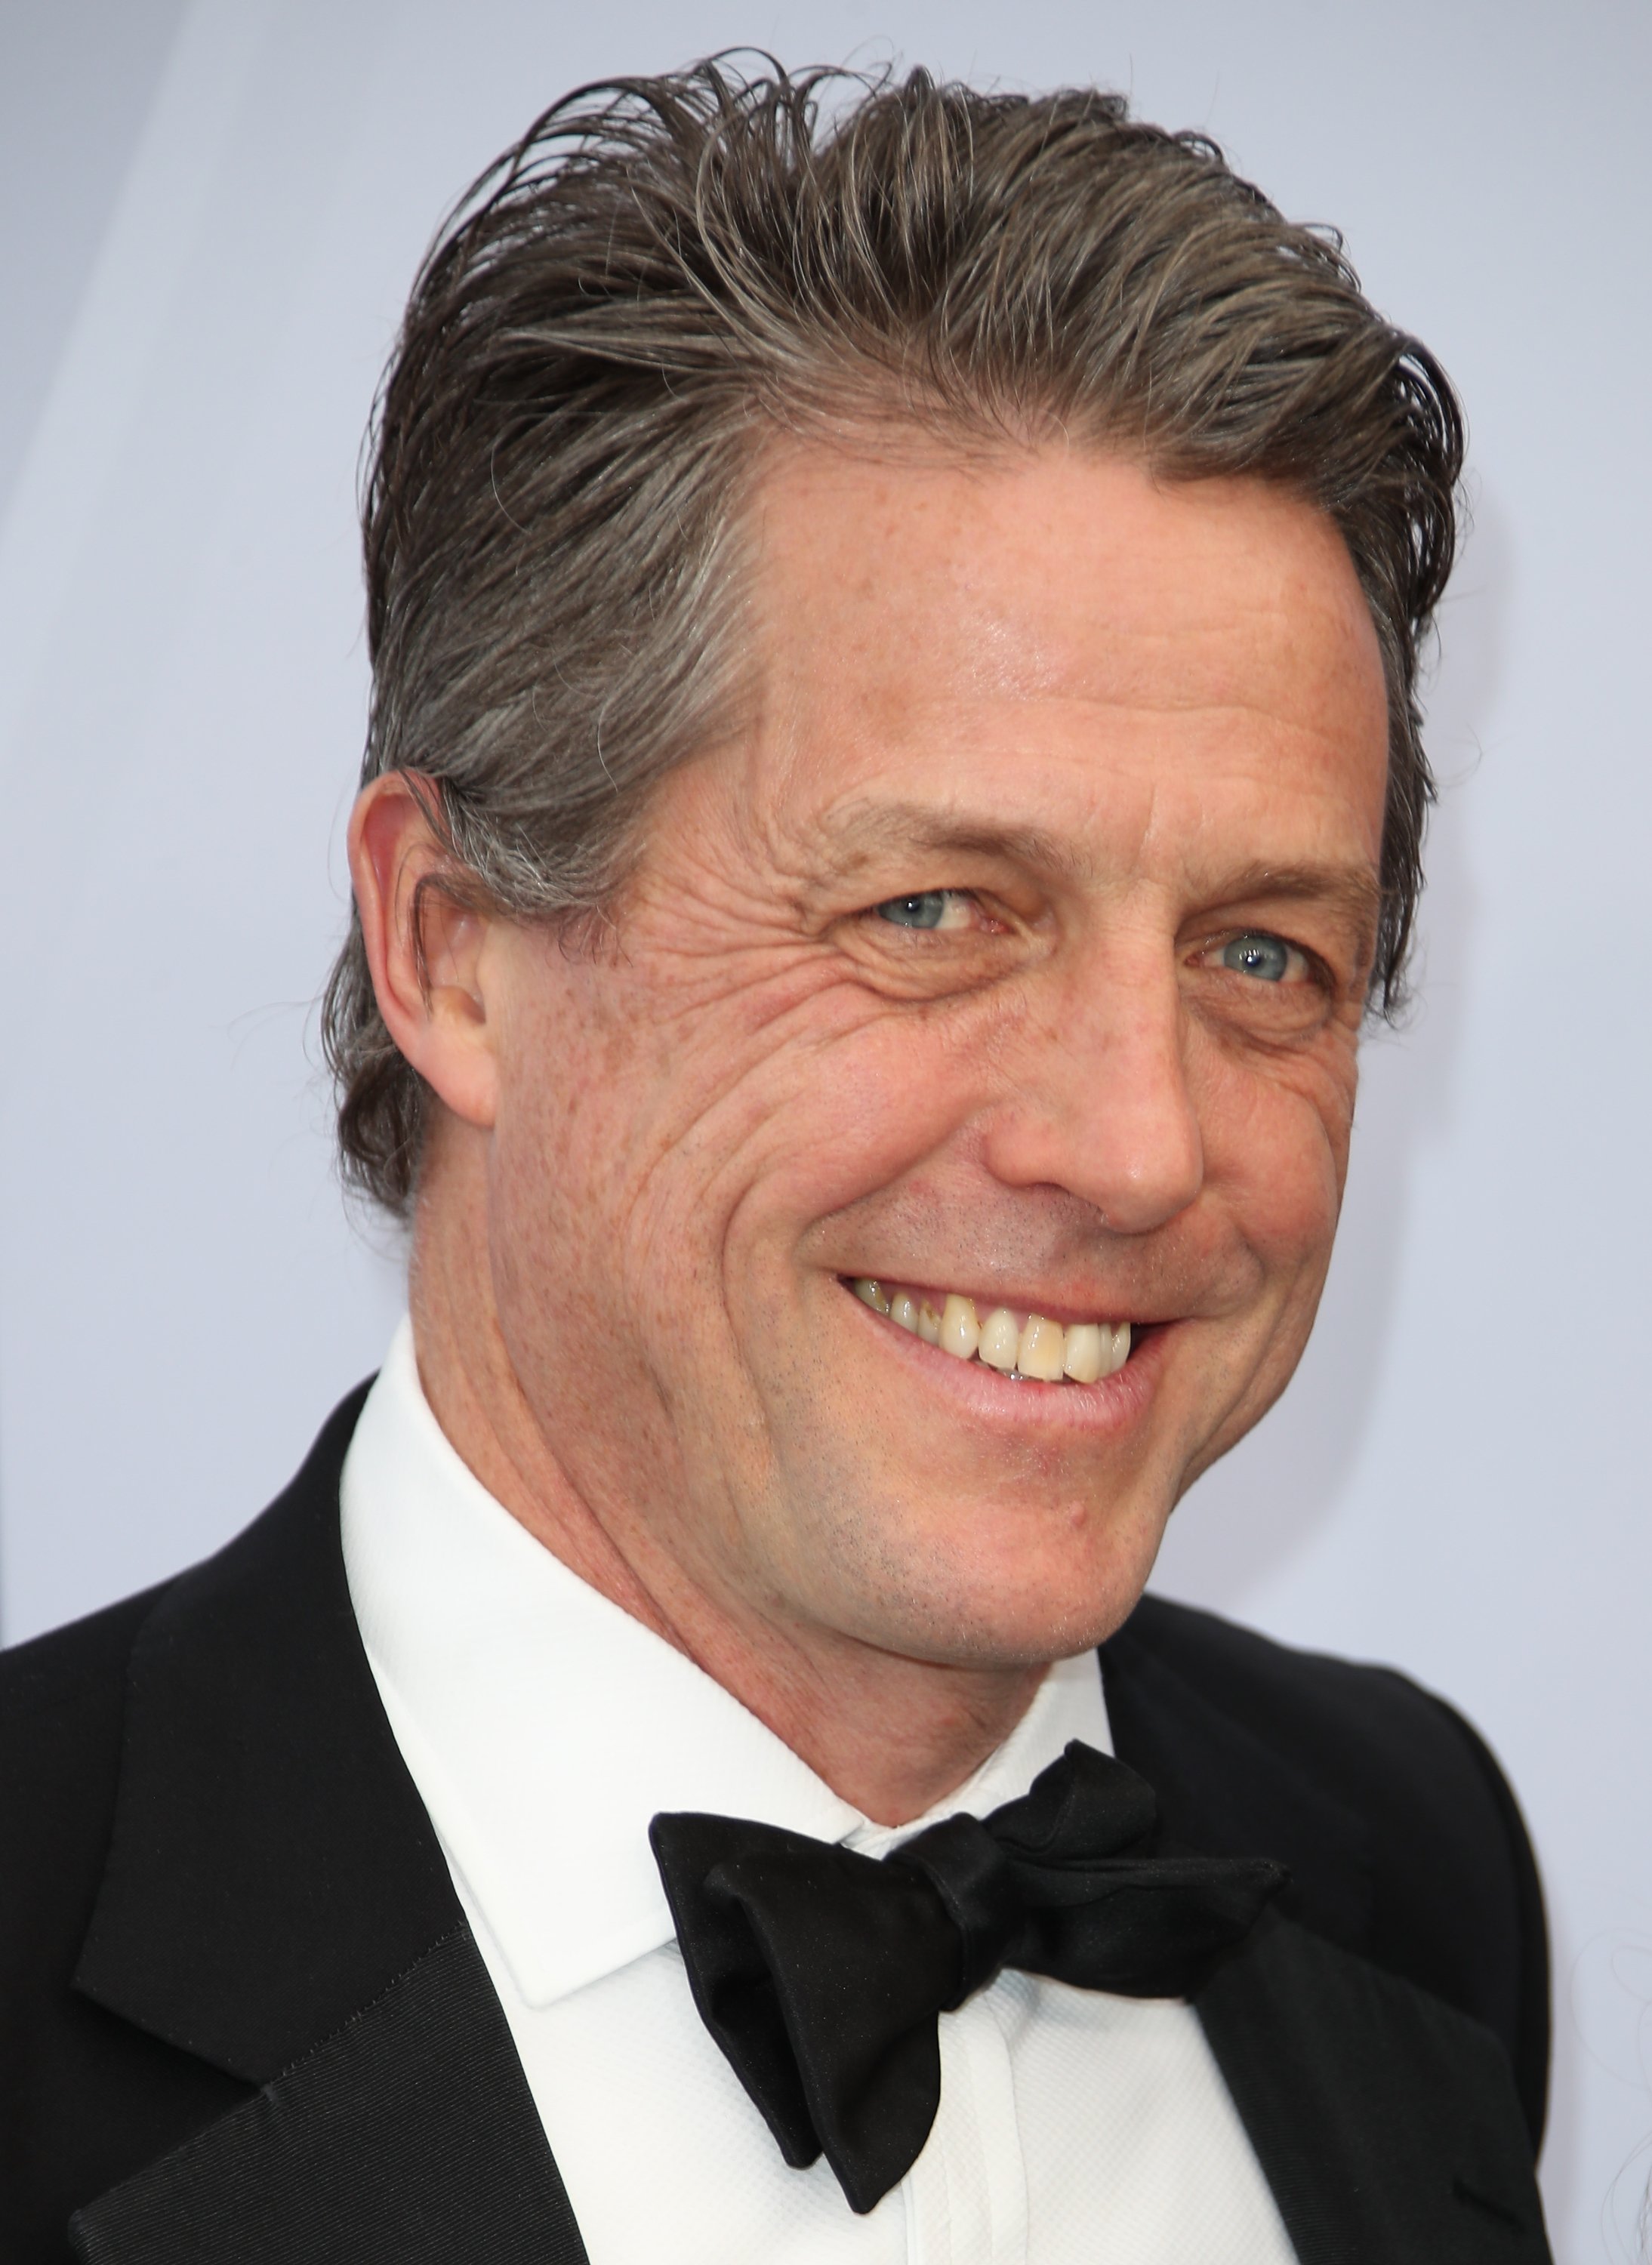 Hugh Grant attending the 25th Annual Screen Actors Guild Awards | Photo: Getty Images